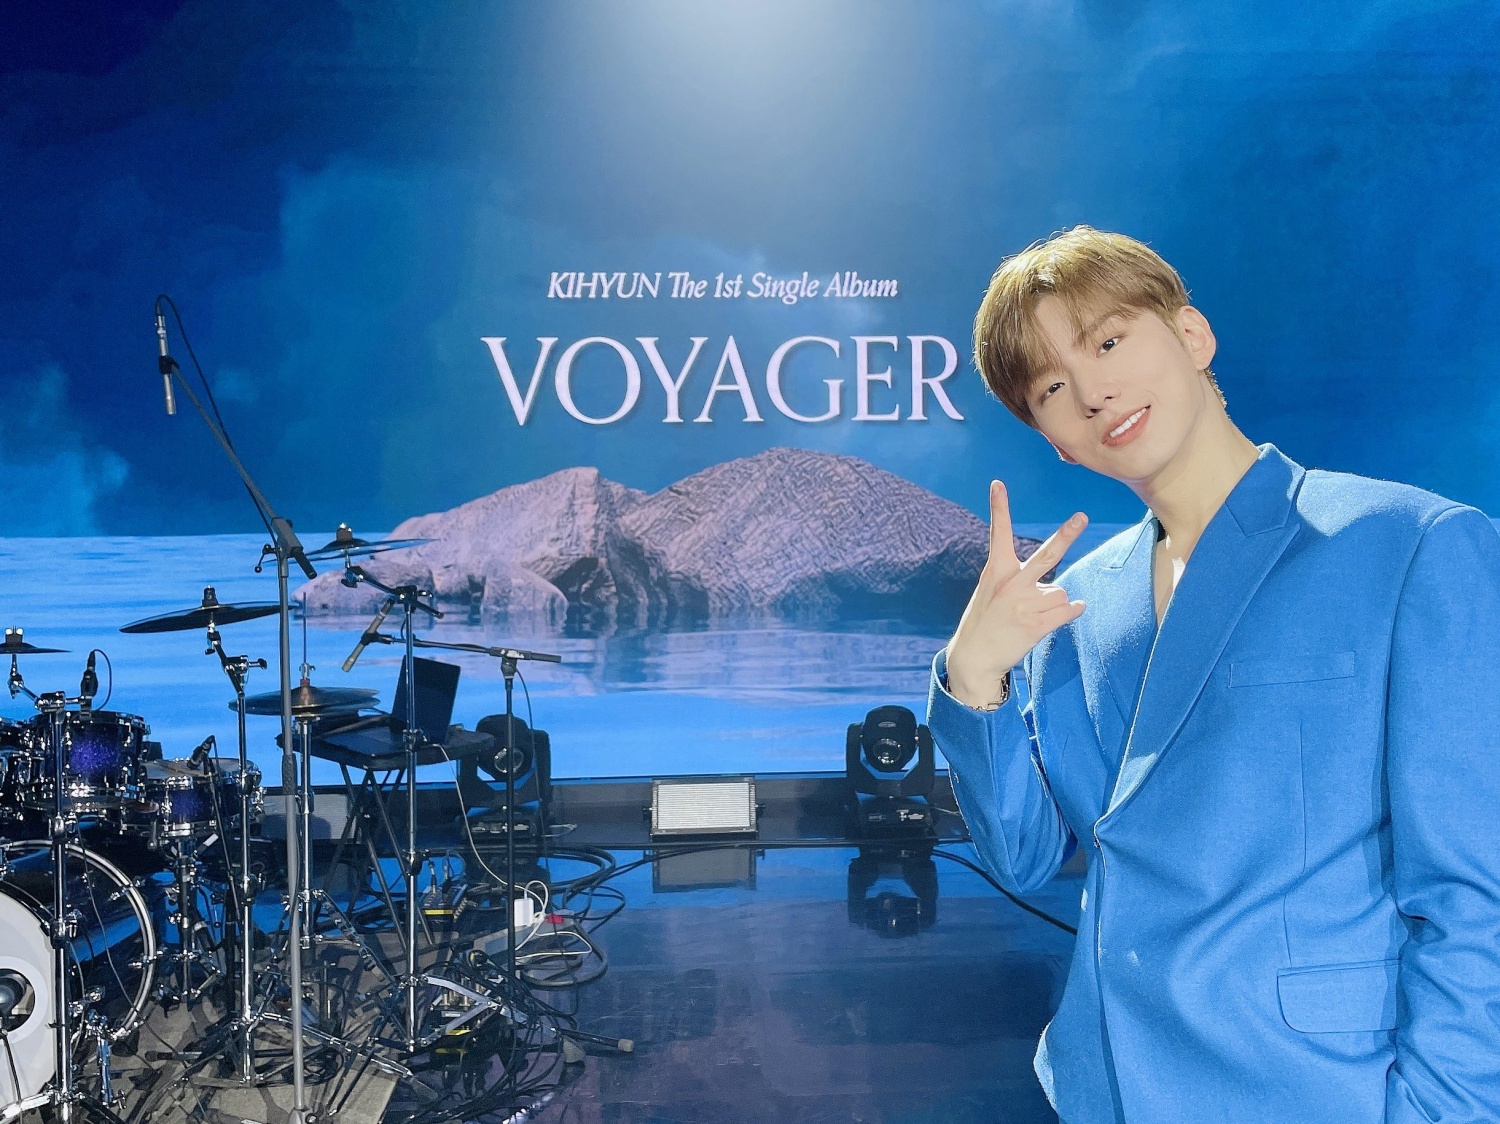 MONSTA X KIHYUN releases 'VOYAGER' today... Solo debut after 7 years